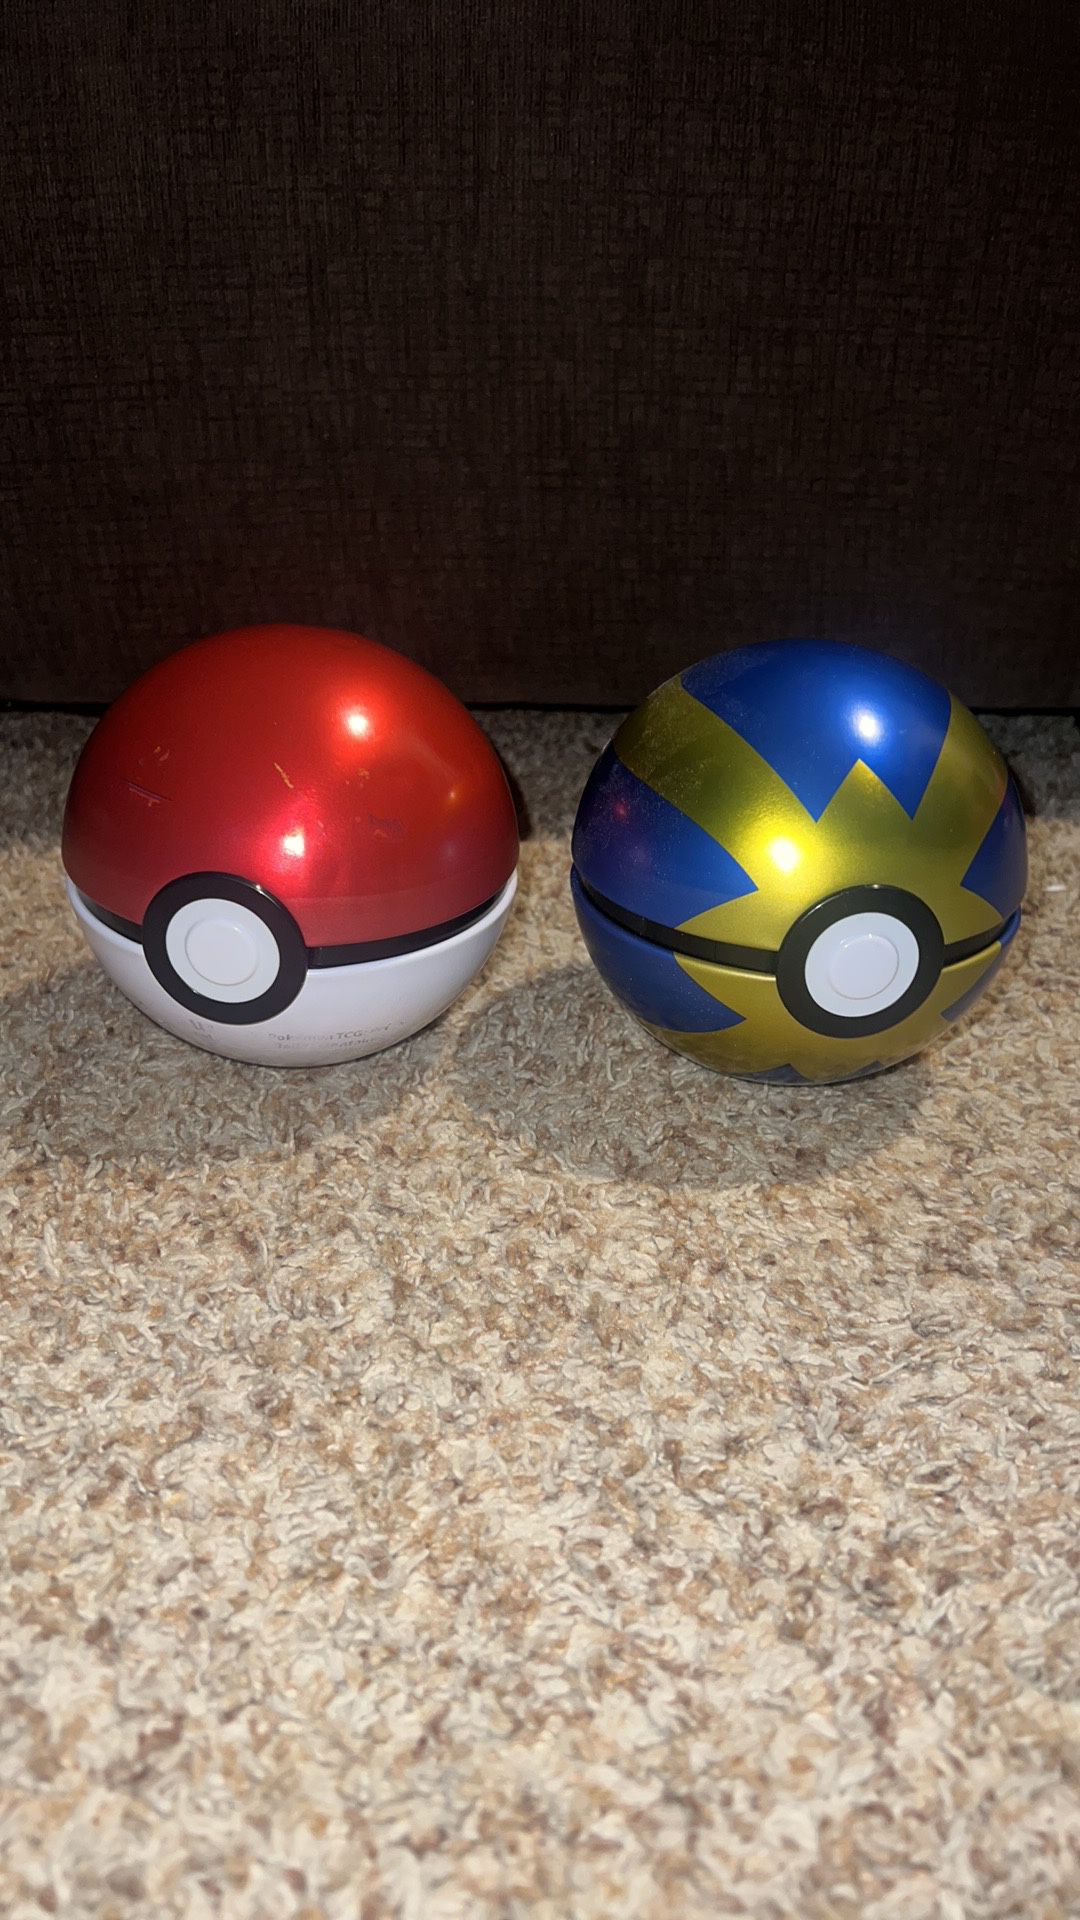 Pokemon Pokeball Ball Tins EMPTY Prop Cosplay. Has some dents/scratches 